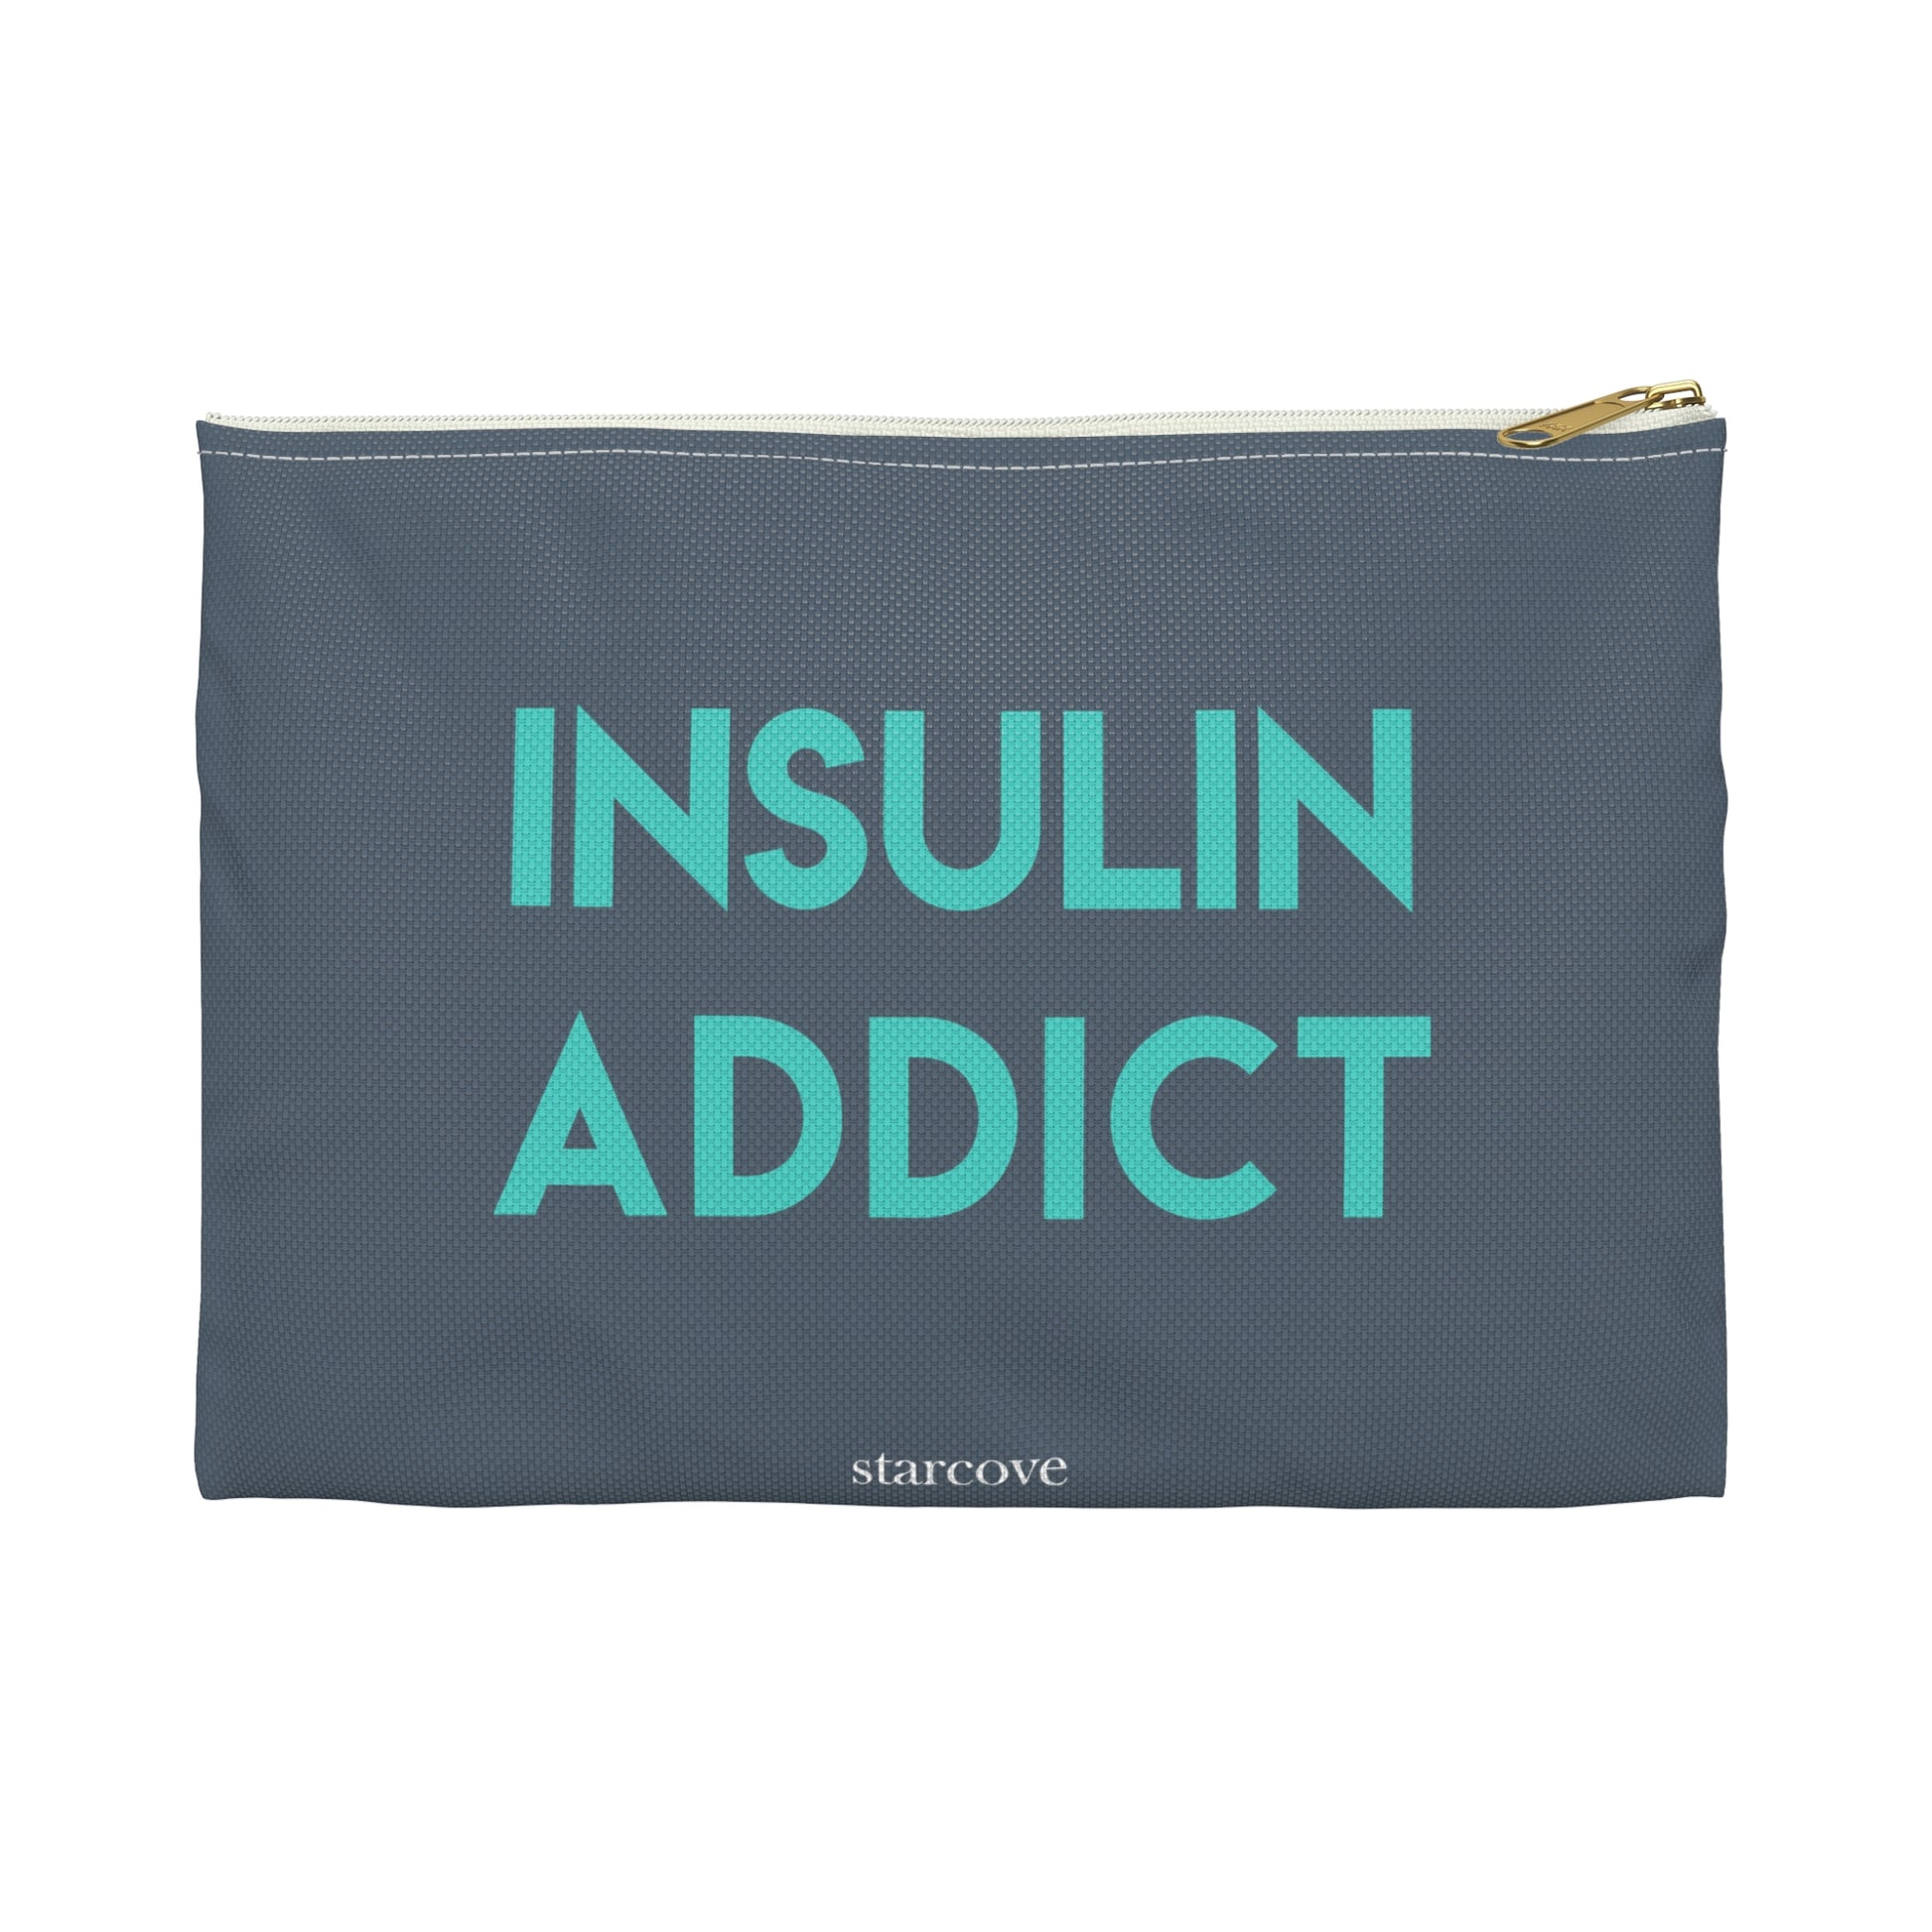 Insulin Addict Diabetes Bag, My Diabetic Supply Pouch Funny Case Type 1 2 One Accessory Zipper Travel Small Large Pouch Gift - Starcove Fashion